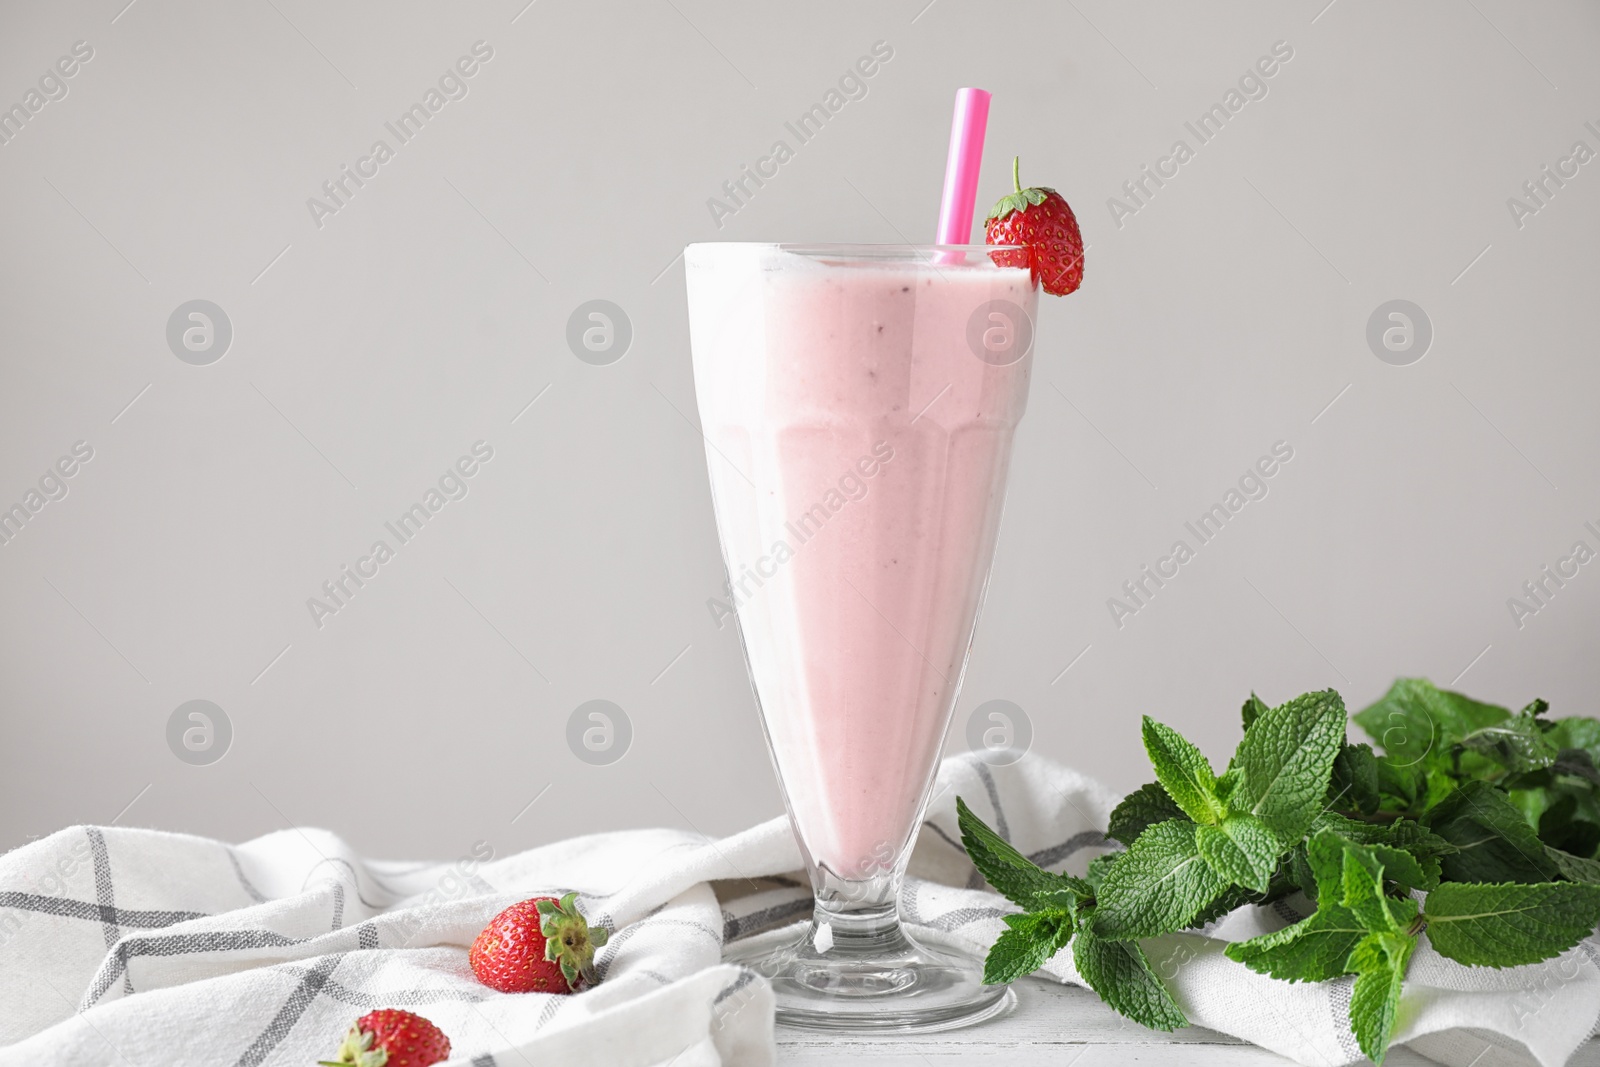 Photo of Tasty strawberry milk shake in glass on table